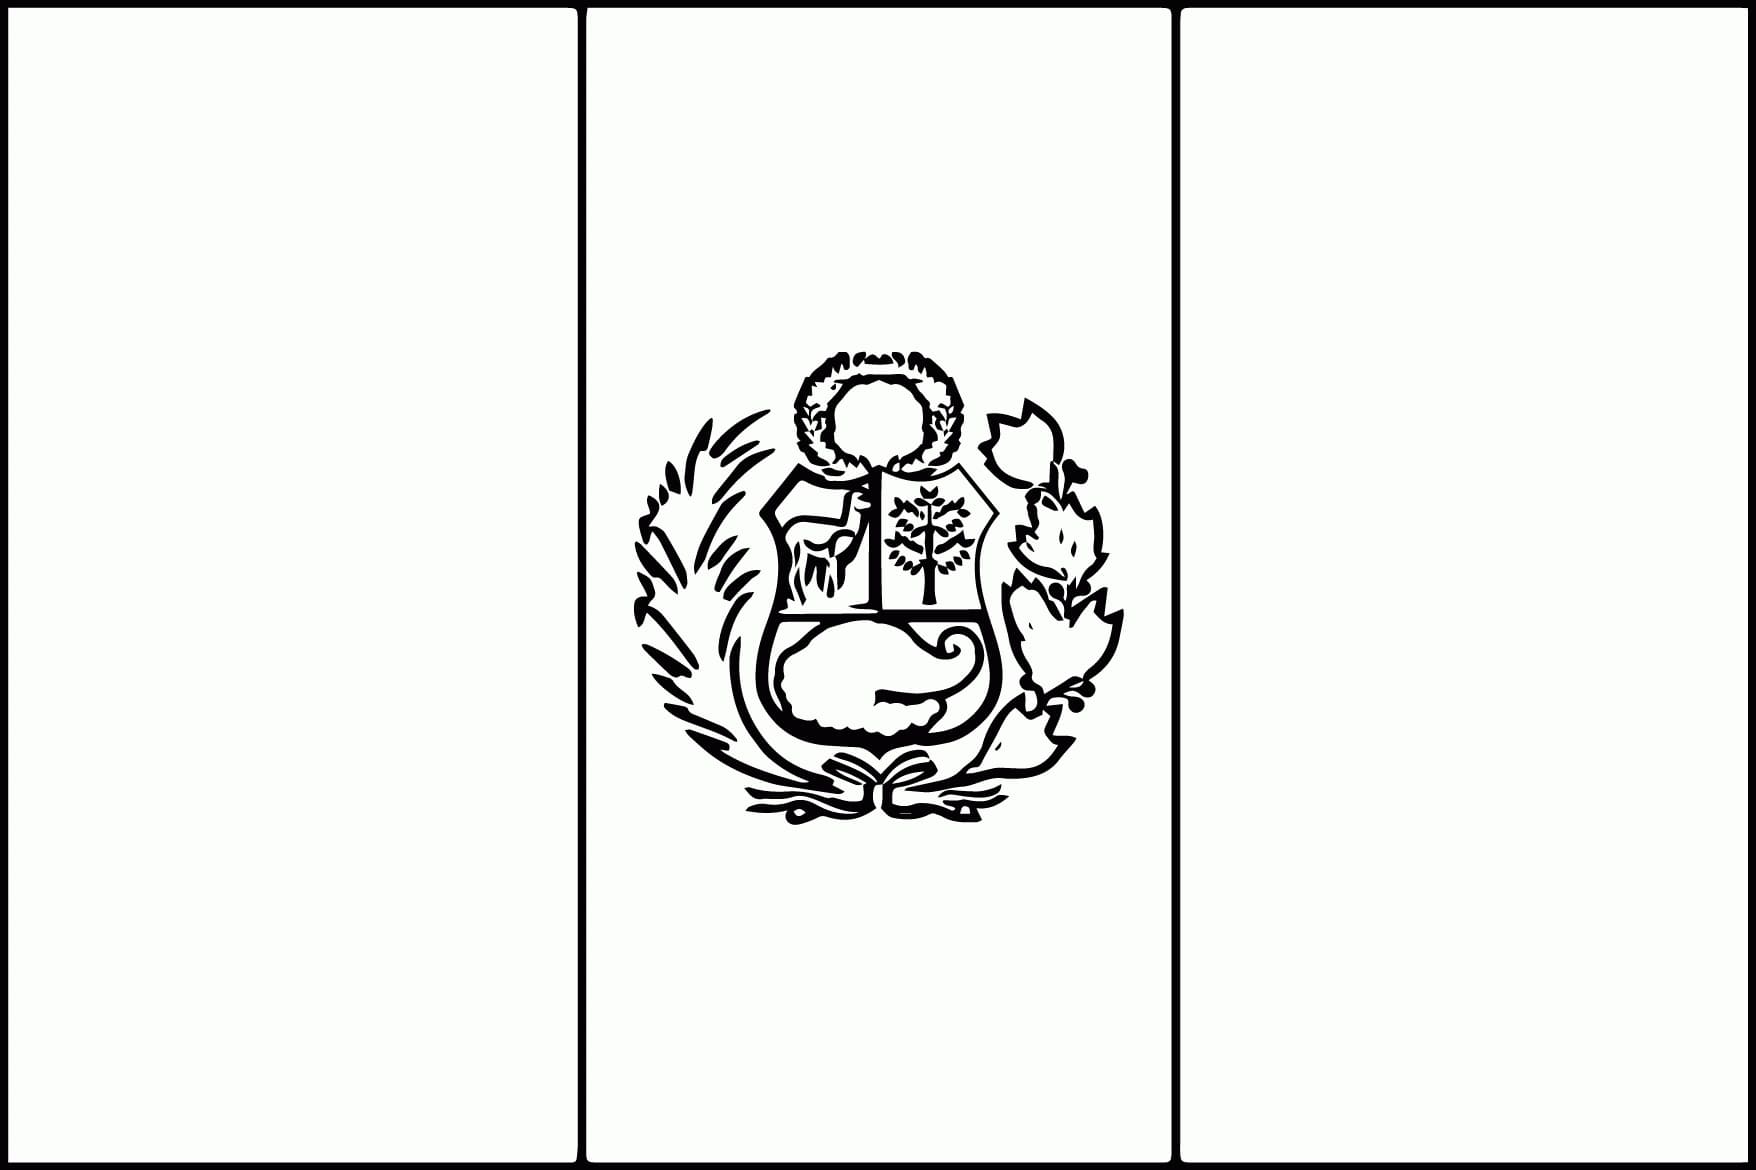 Printable Peru Flag coloring page - Download, Print or Color Online for ...